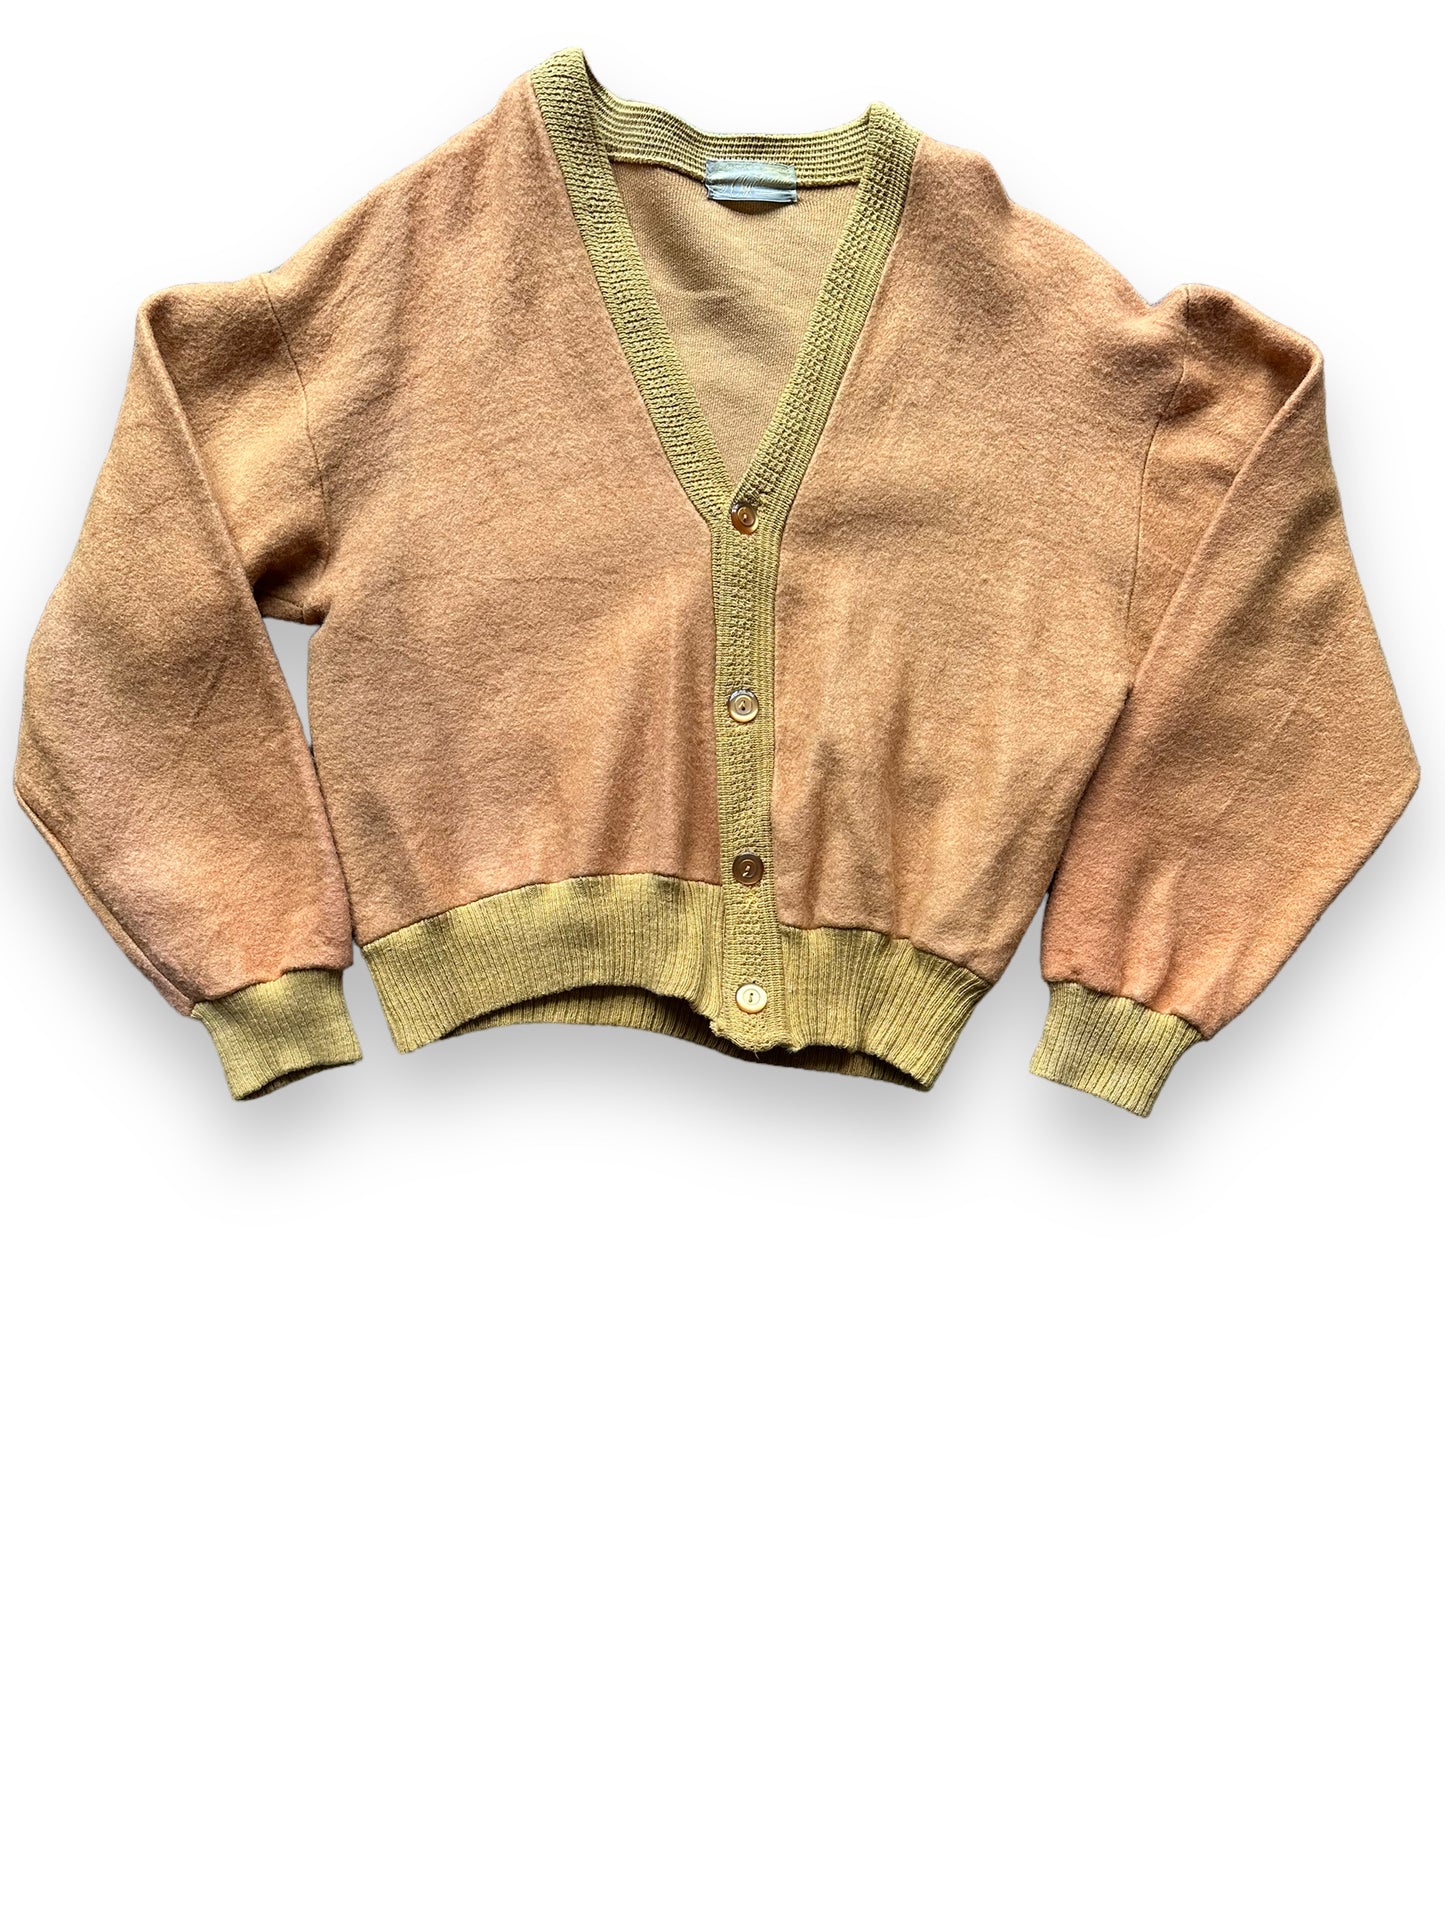 Front View of Vintage 1930s Clydesdale Cardigan SZ L | Vintage Cardigan Sweaters | Vintage Clothing Seattle